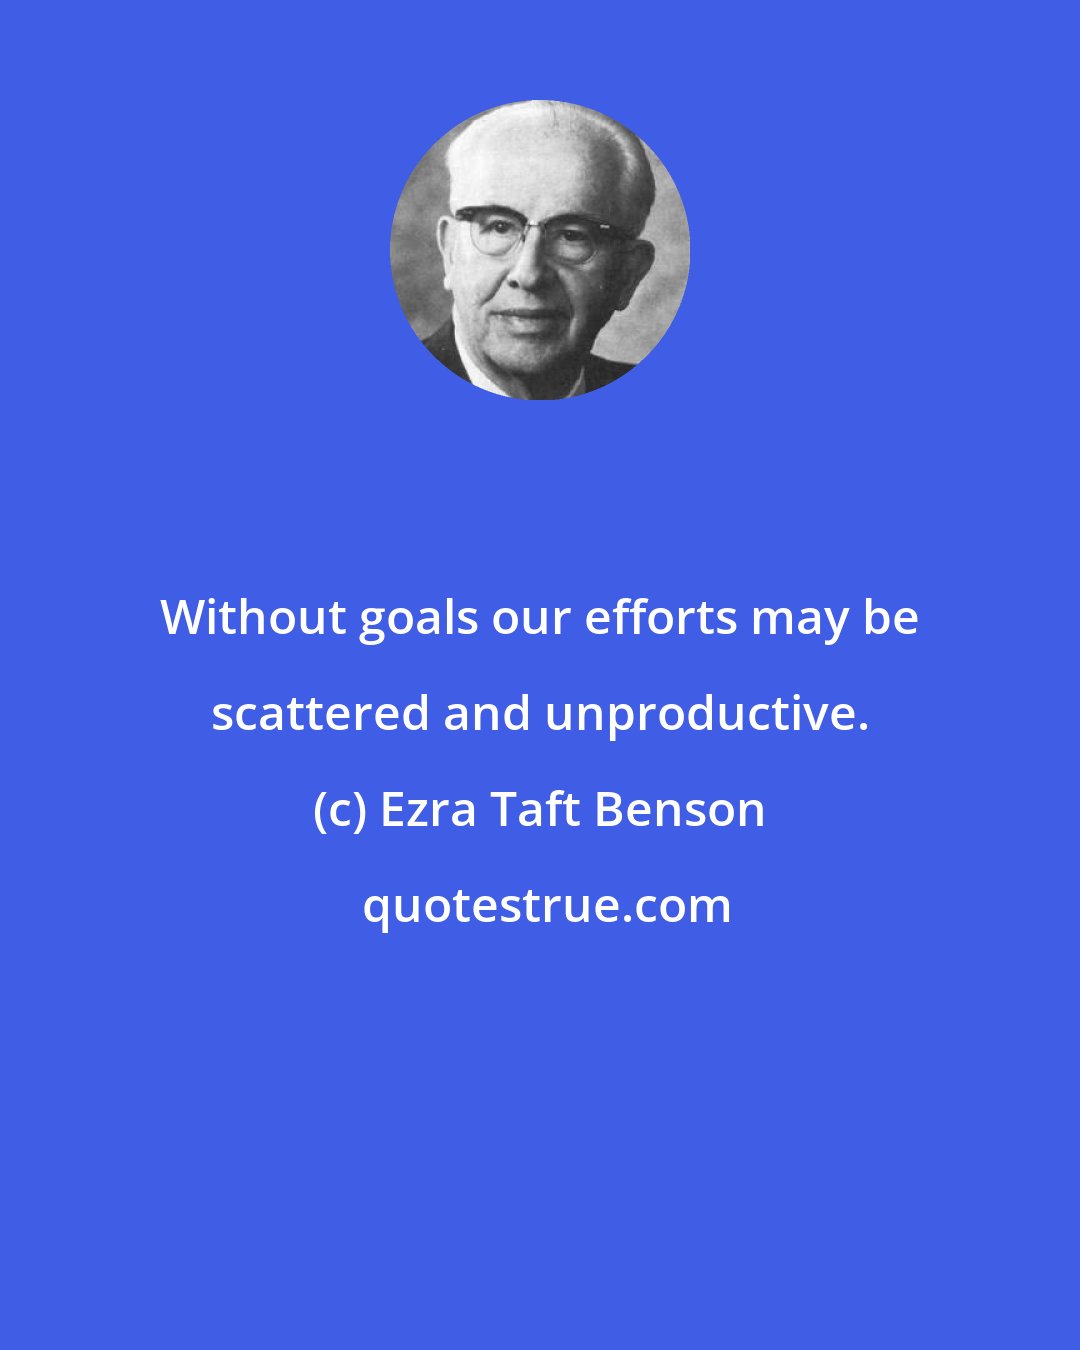 Ezra Taft Benson: Without goals our efforts may be scattered and unproductive.